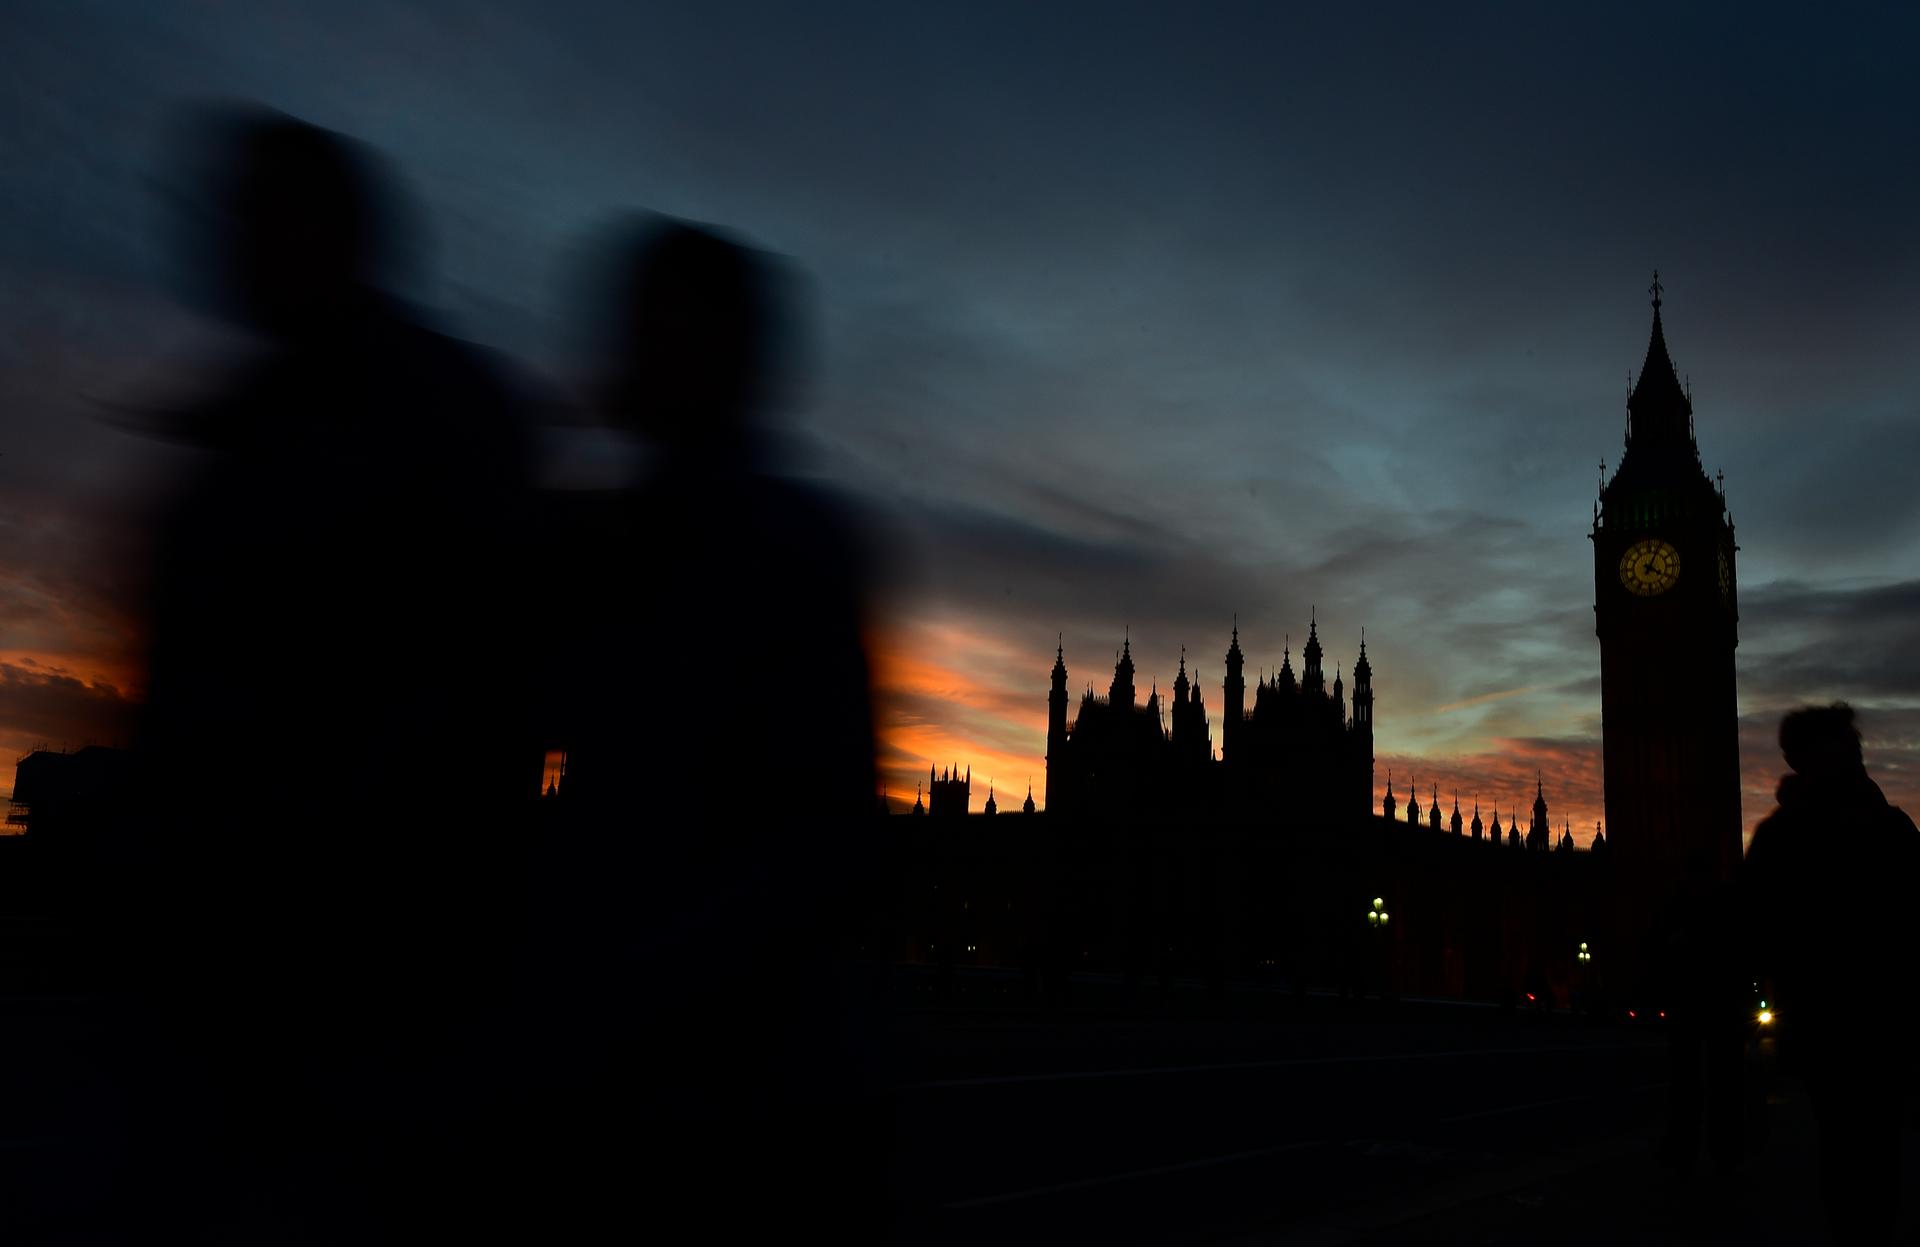 At midnight on New Year's eve, Britain turns to the sound of Big Ben